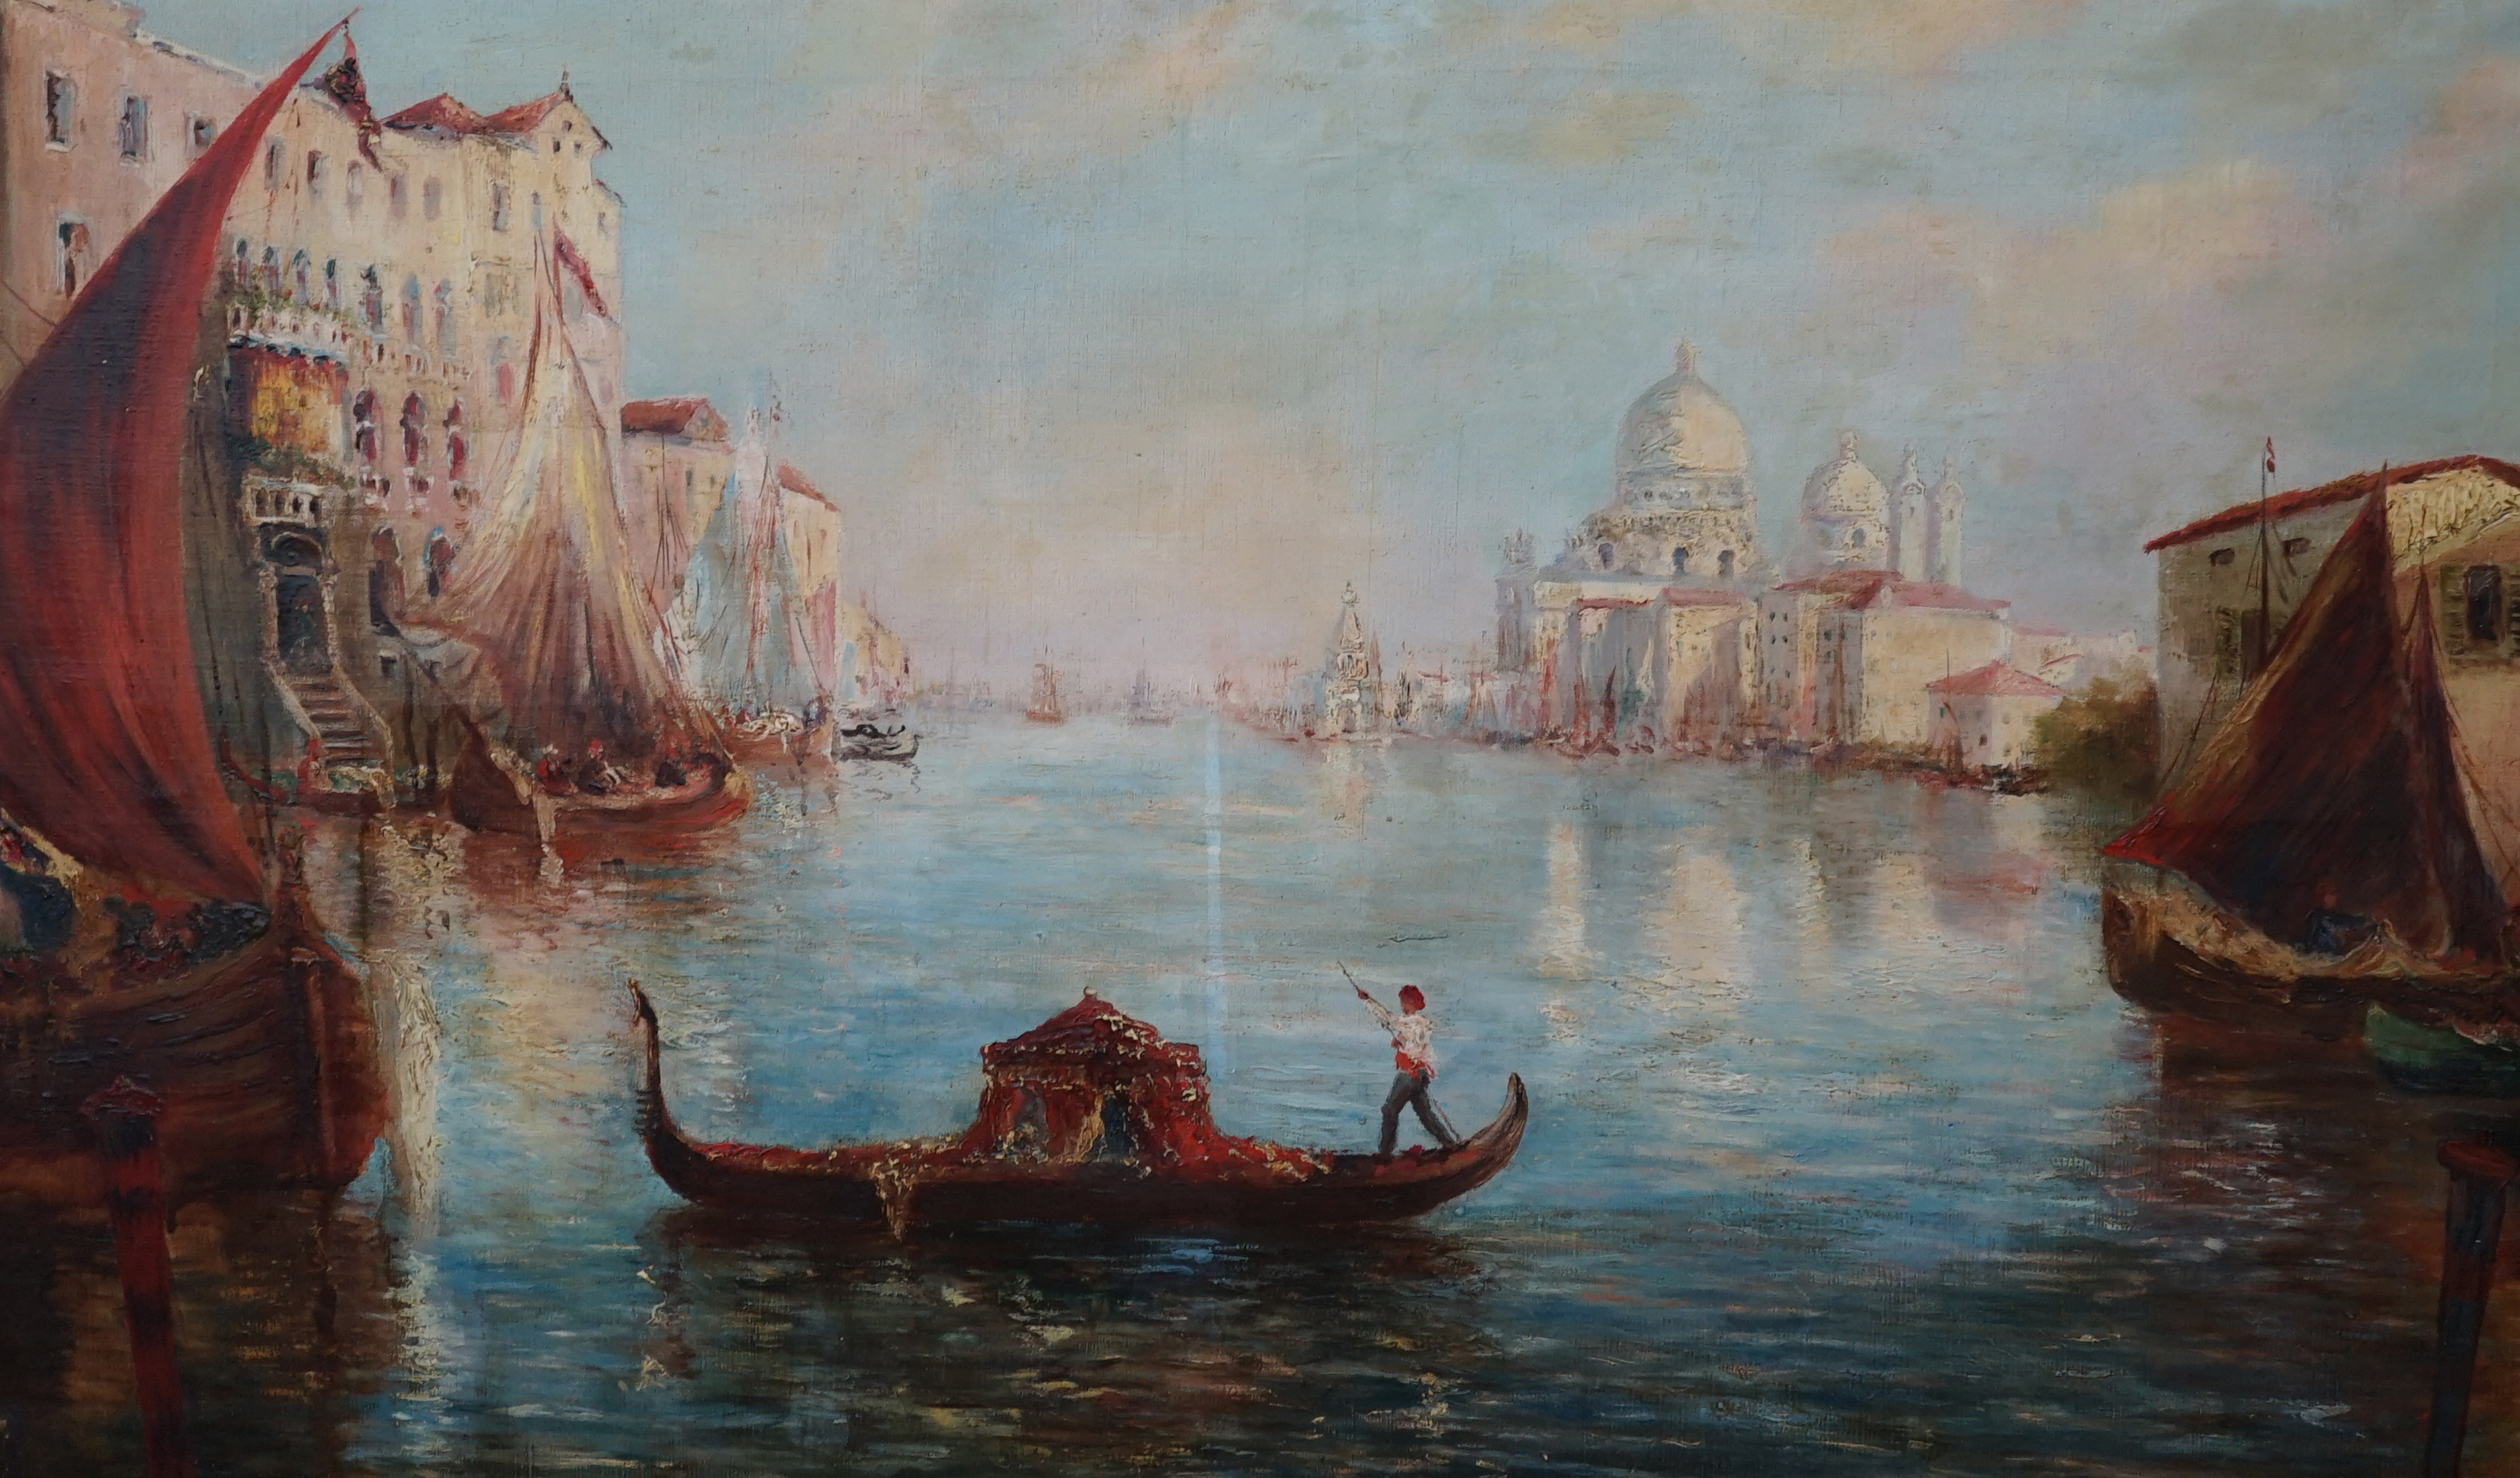 T. Jarazynski (19th.C), oil on canvas, Venetian scene, signed, unframed, 66 x 112cm. Condition - poor to fair, surface dirt and scuffs